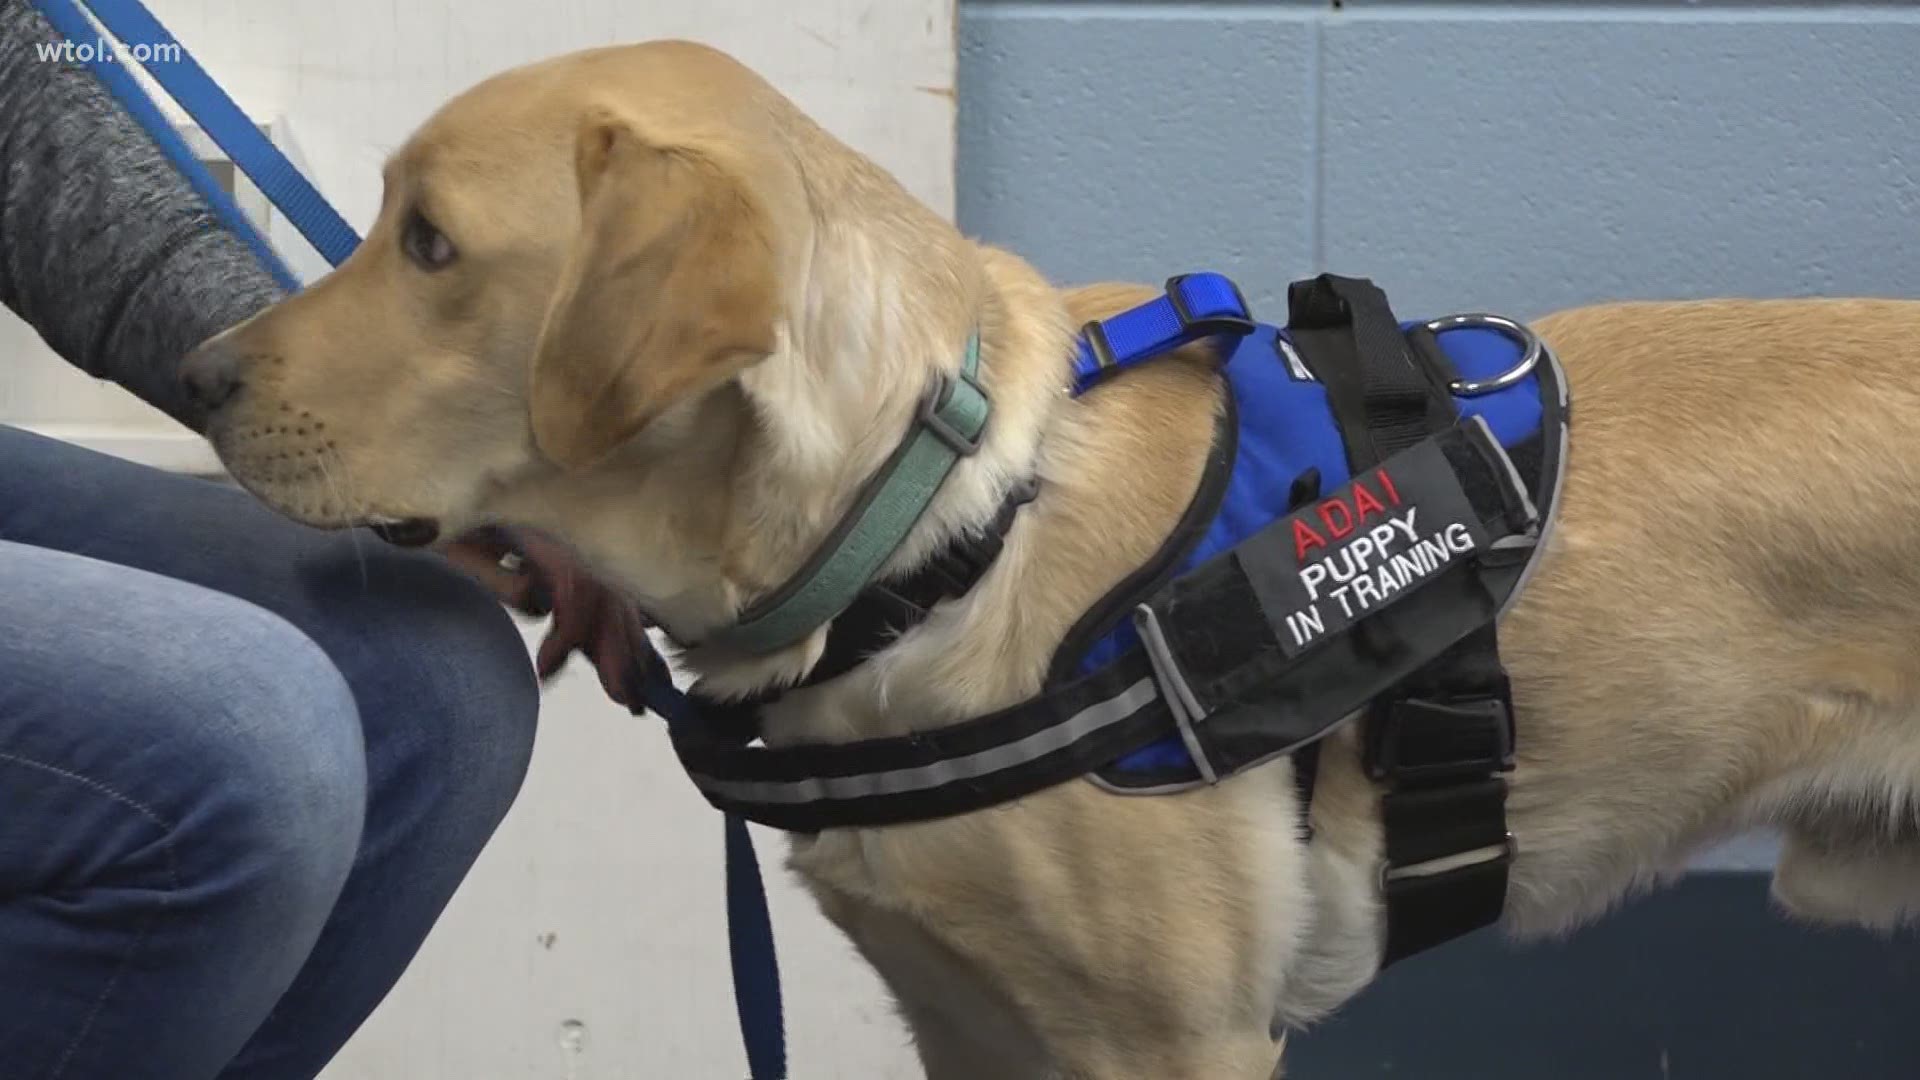 Since the onset of the COVID-19 pandemic, it has become more difficult to house service dogs in training.